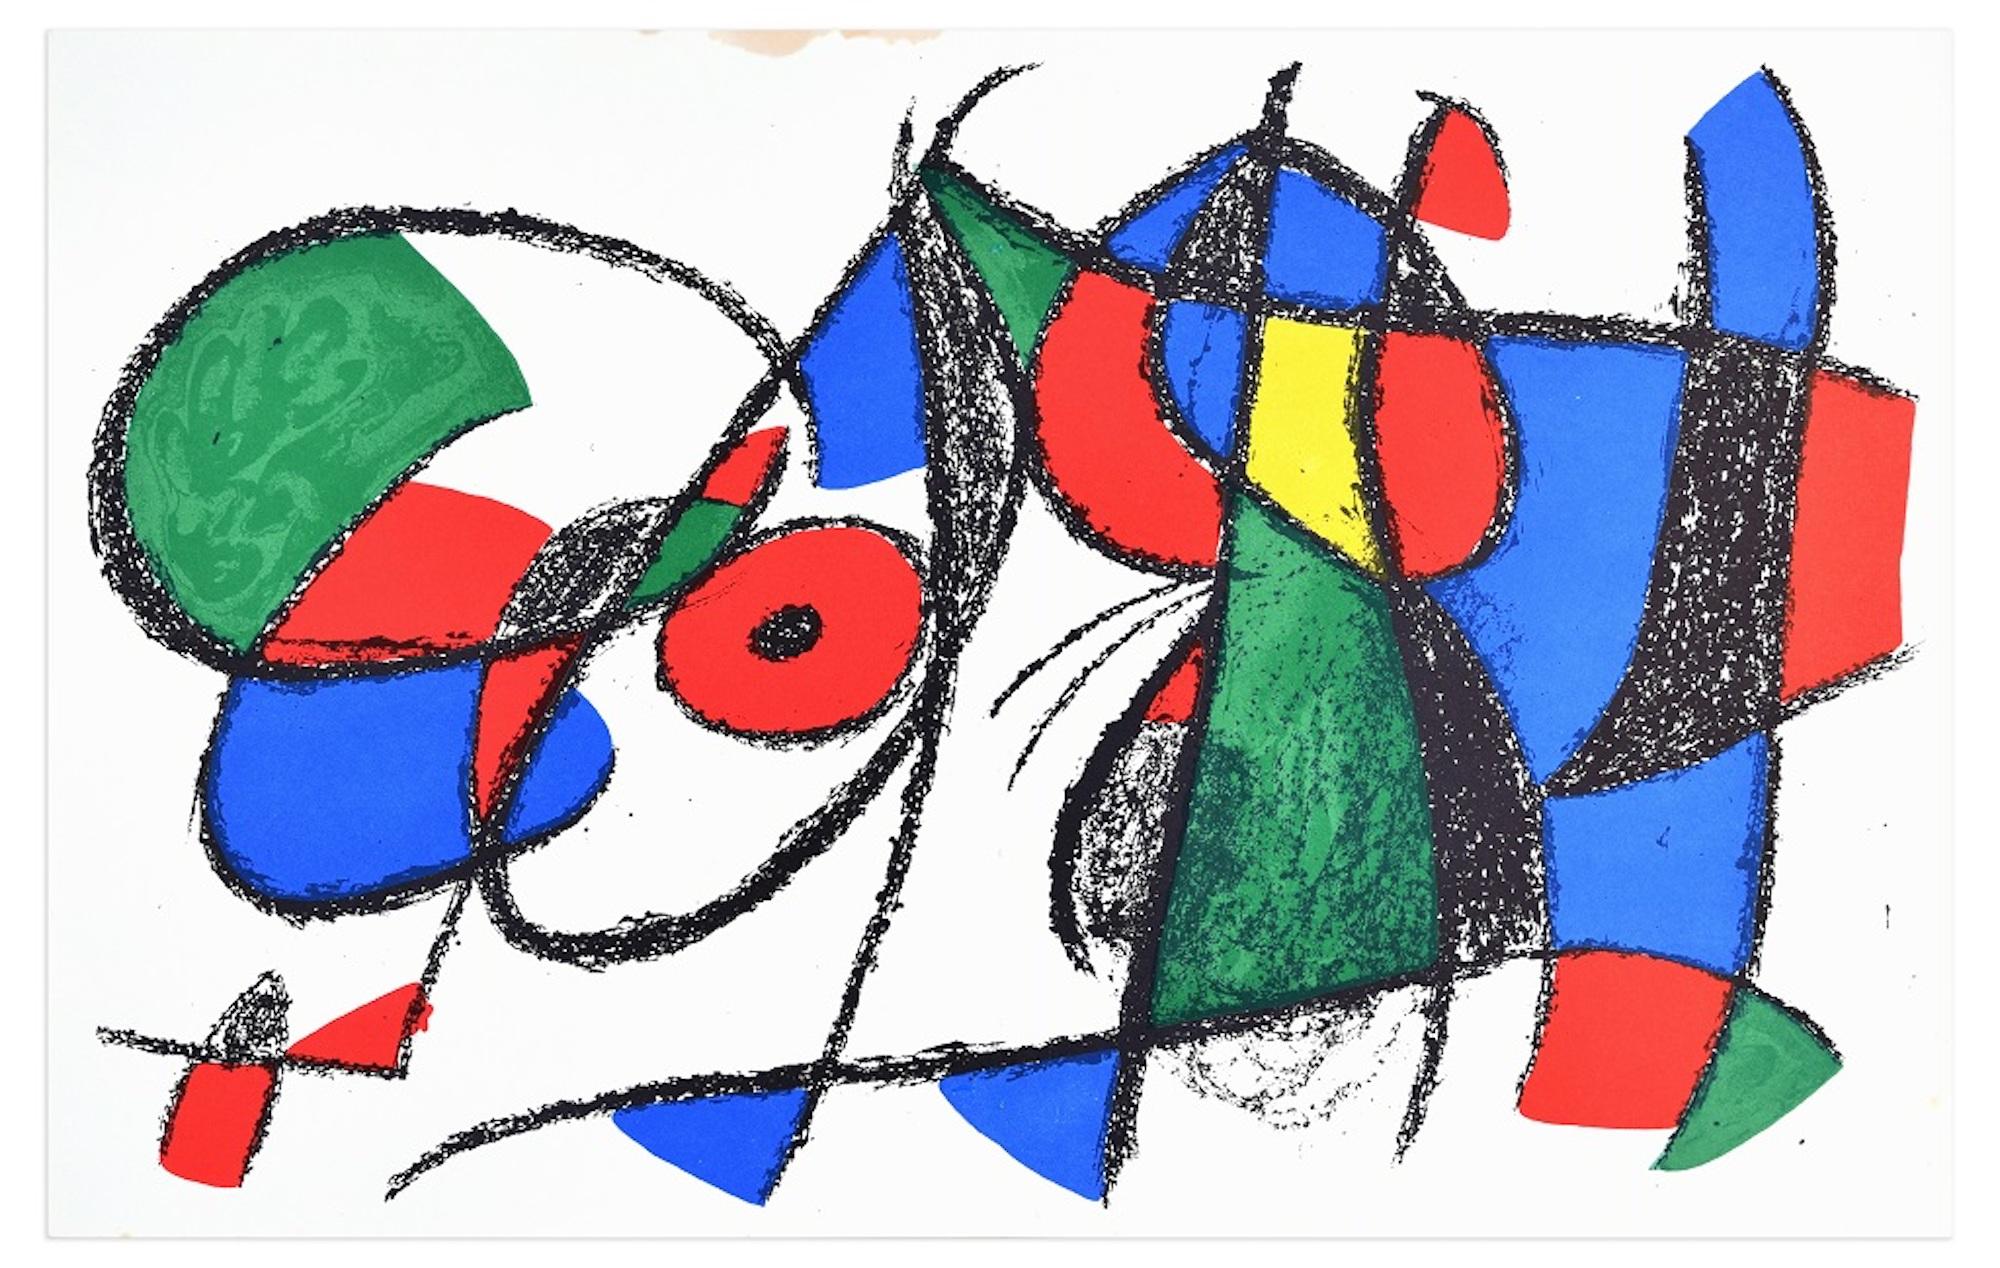 (after) Joan Miró Abstract Print - Composition VIII -  Lithograph by Joan Mirò - 1974